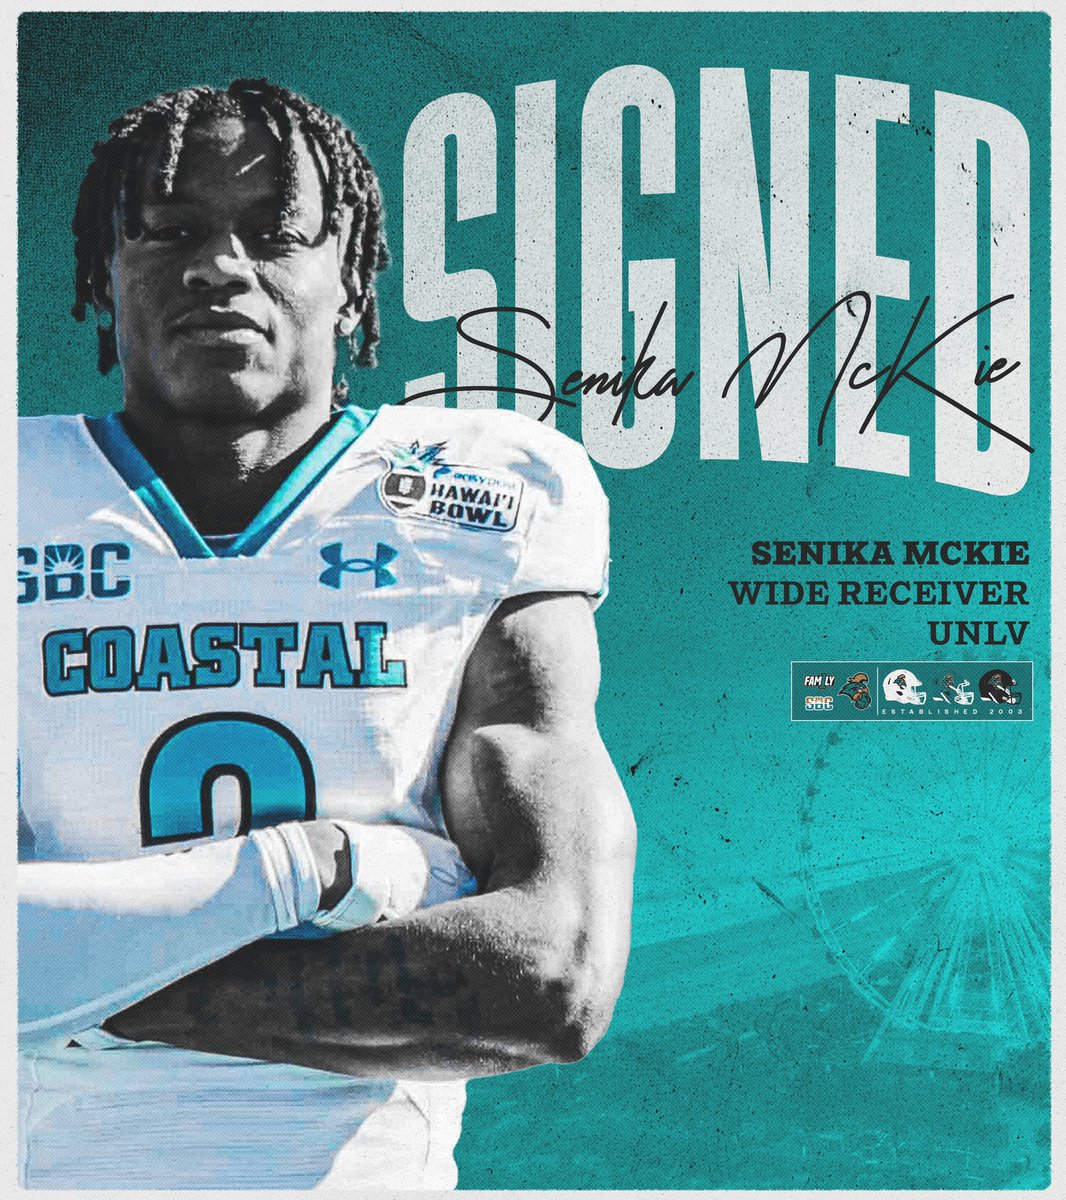 Proud to bring him back to the Palmetto State 🏠 Welcome to Coastal, @senikamckie! #BALLATTHEBEACH | #FAM1LY | #TEALNATION